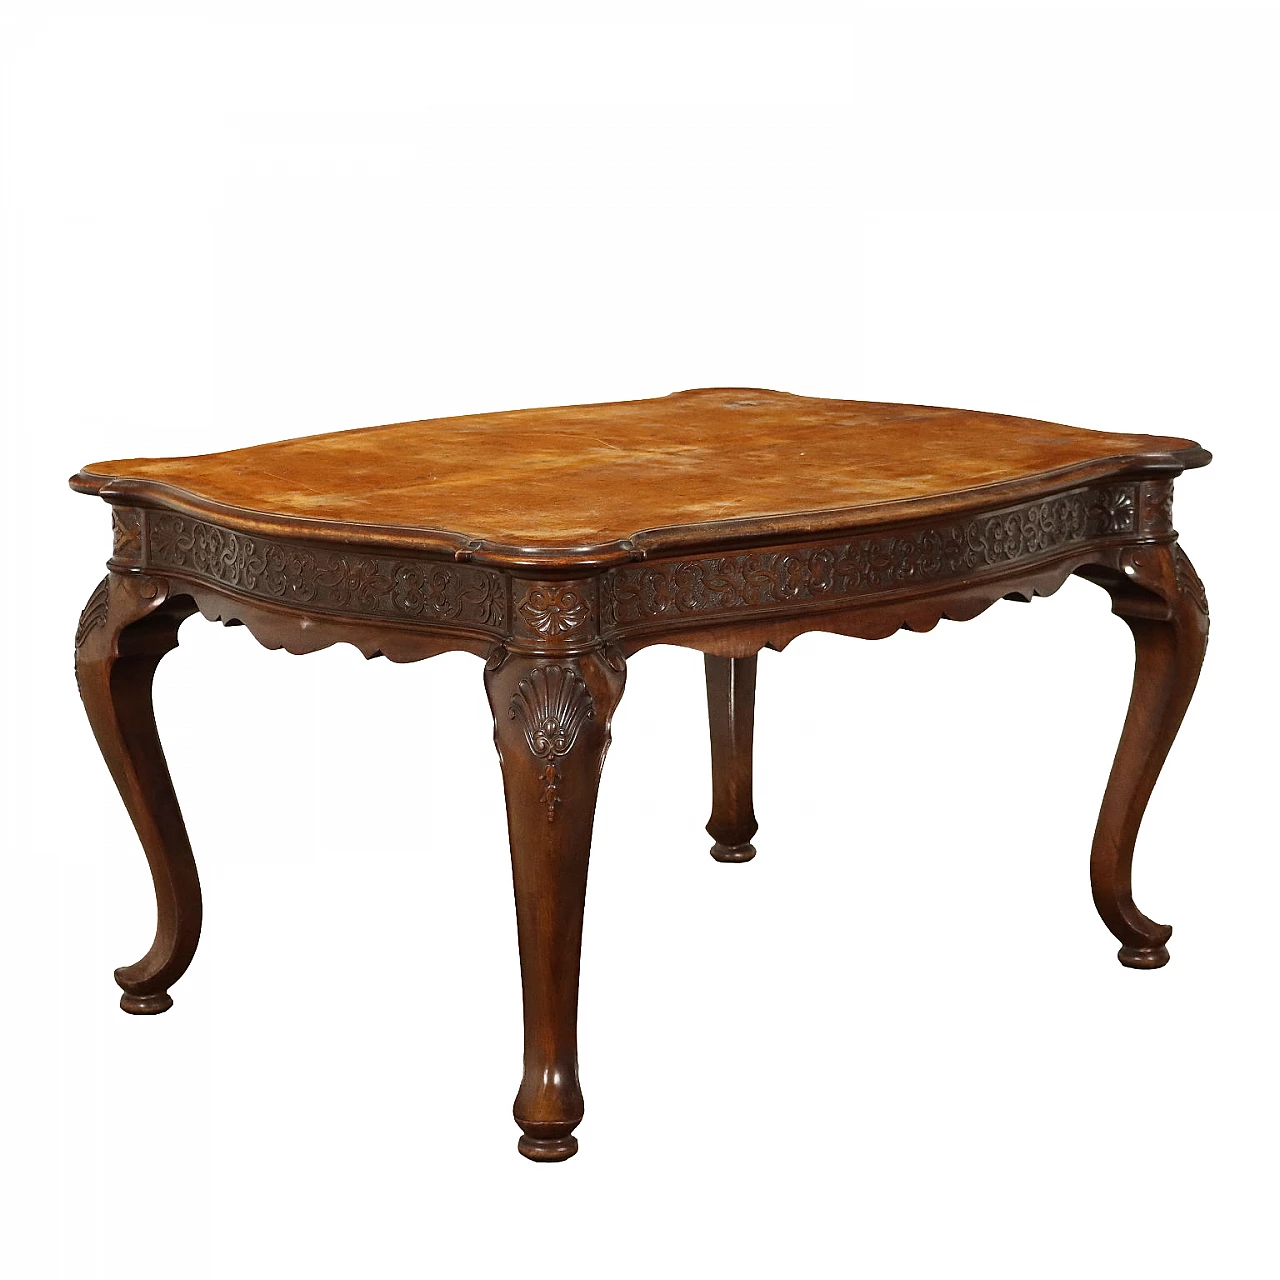 Walnut table with carvings 1